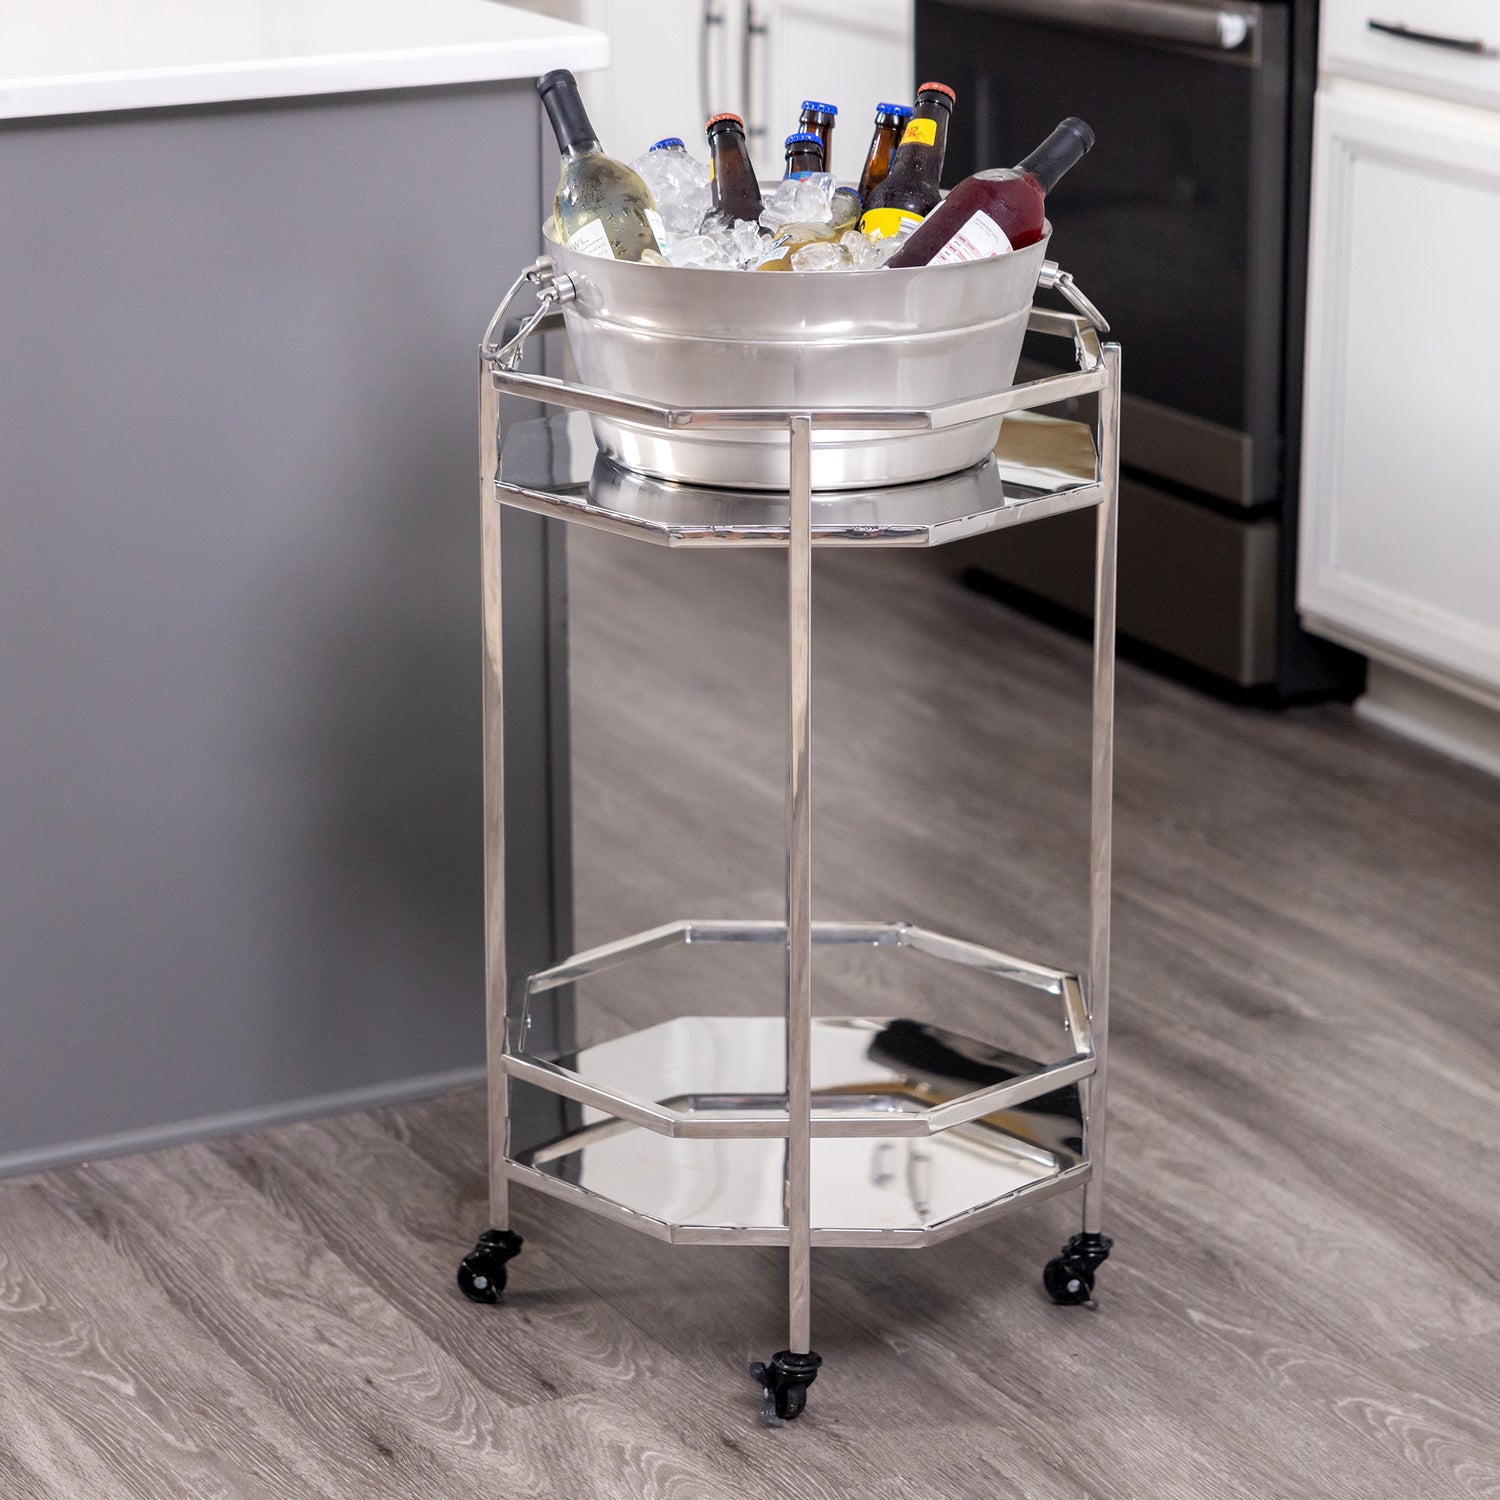 Metal bar cart that rolls can hold an ice bucket or wine bucket and be used in the bar, kitchen, or dining room when serving and entertaining at a party.